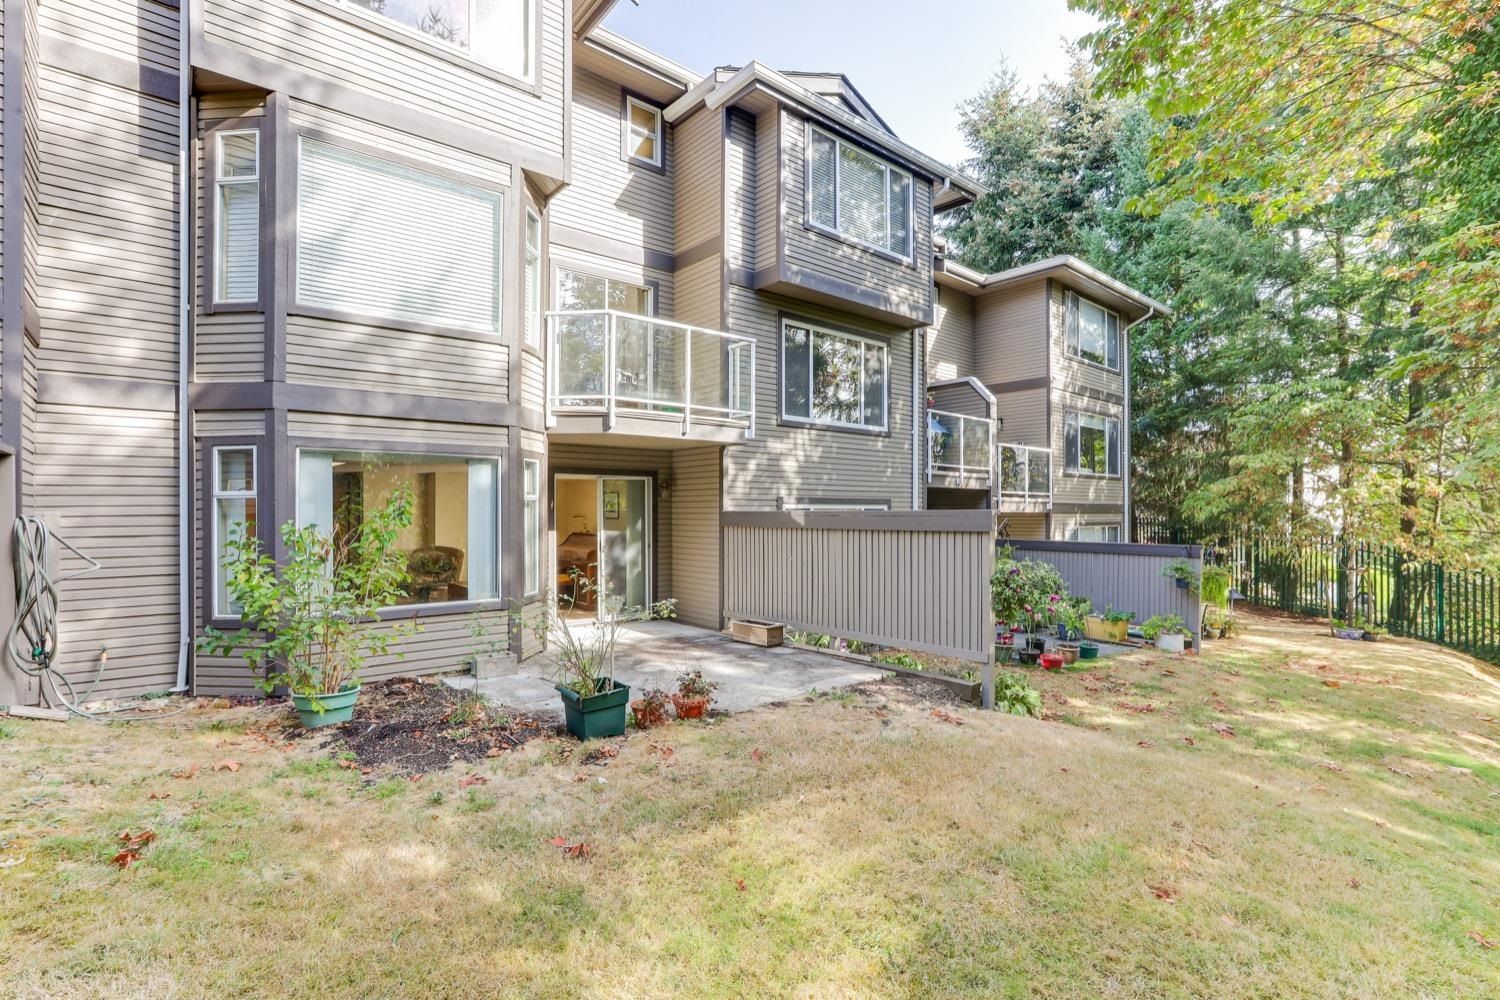 We have just sold a property at 180 1140 CASTLE CRES in Port Coquitlam